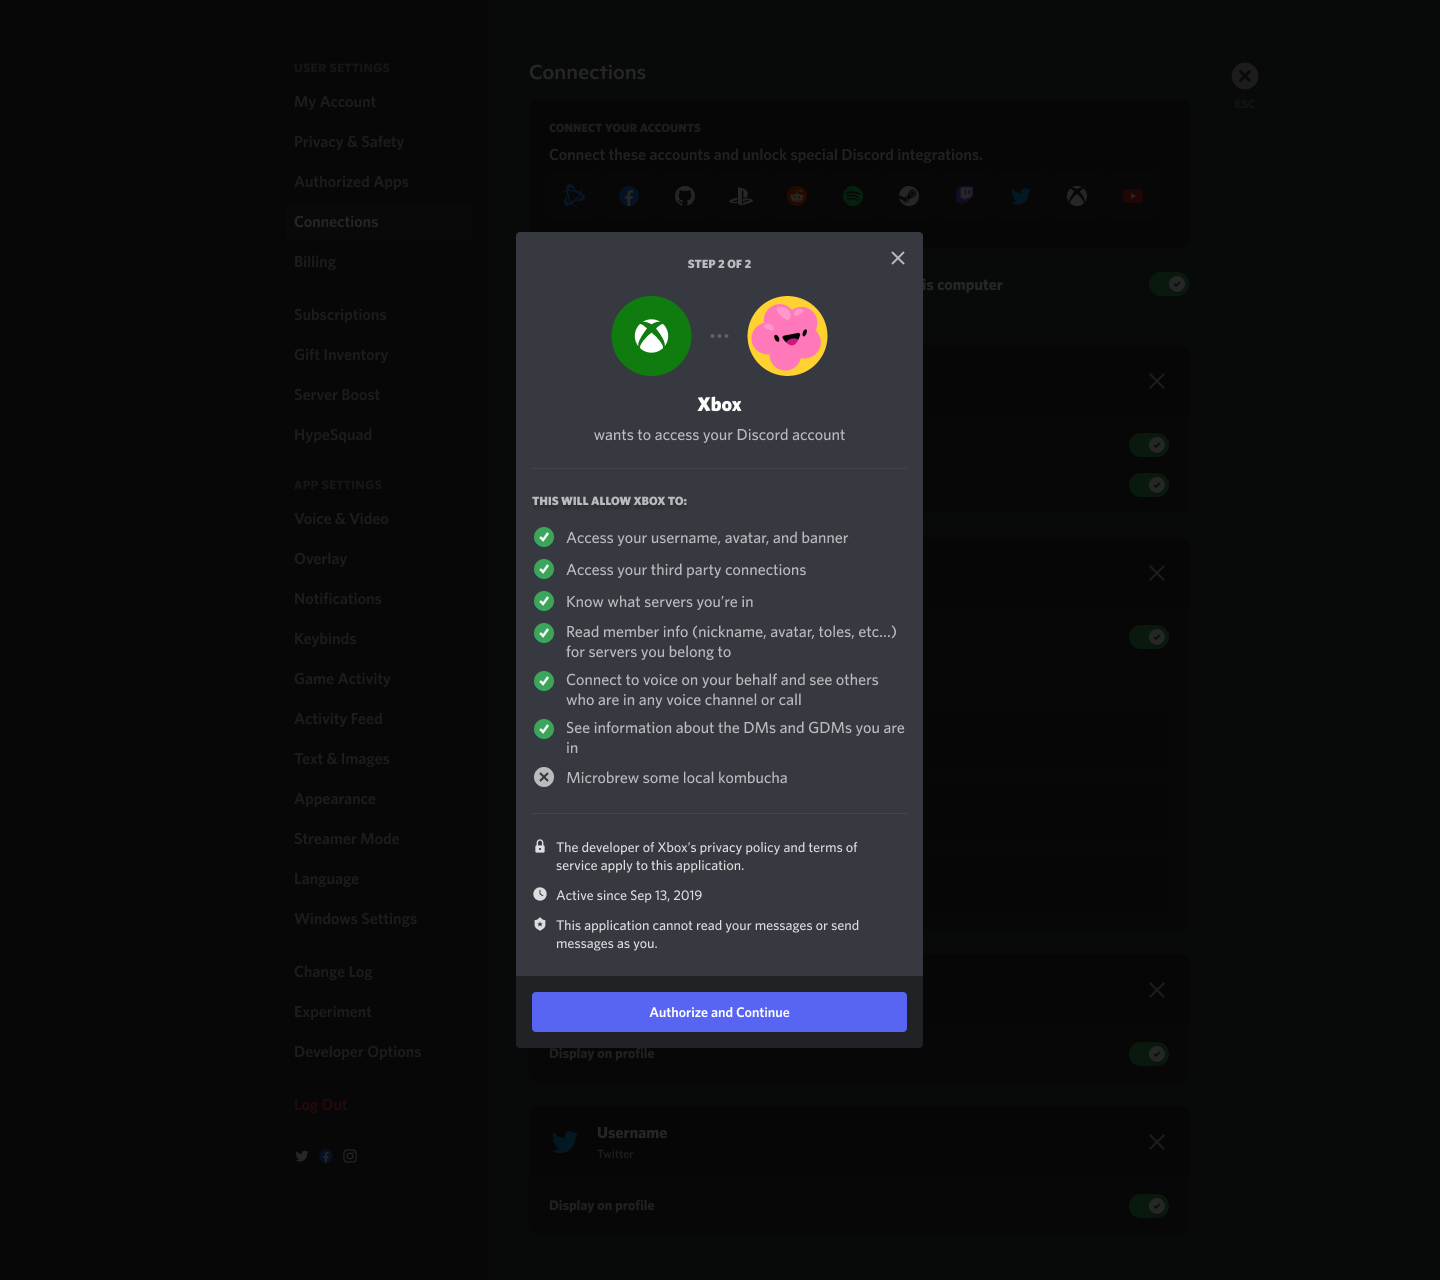 authorize-continue-account-linking-xbox-discord-base.png